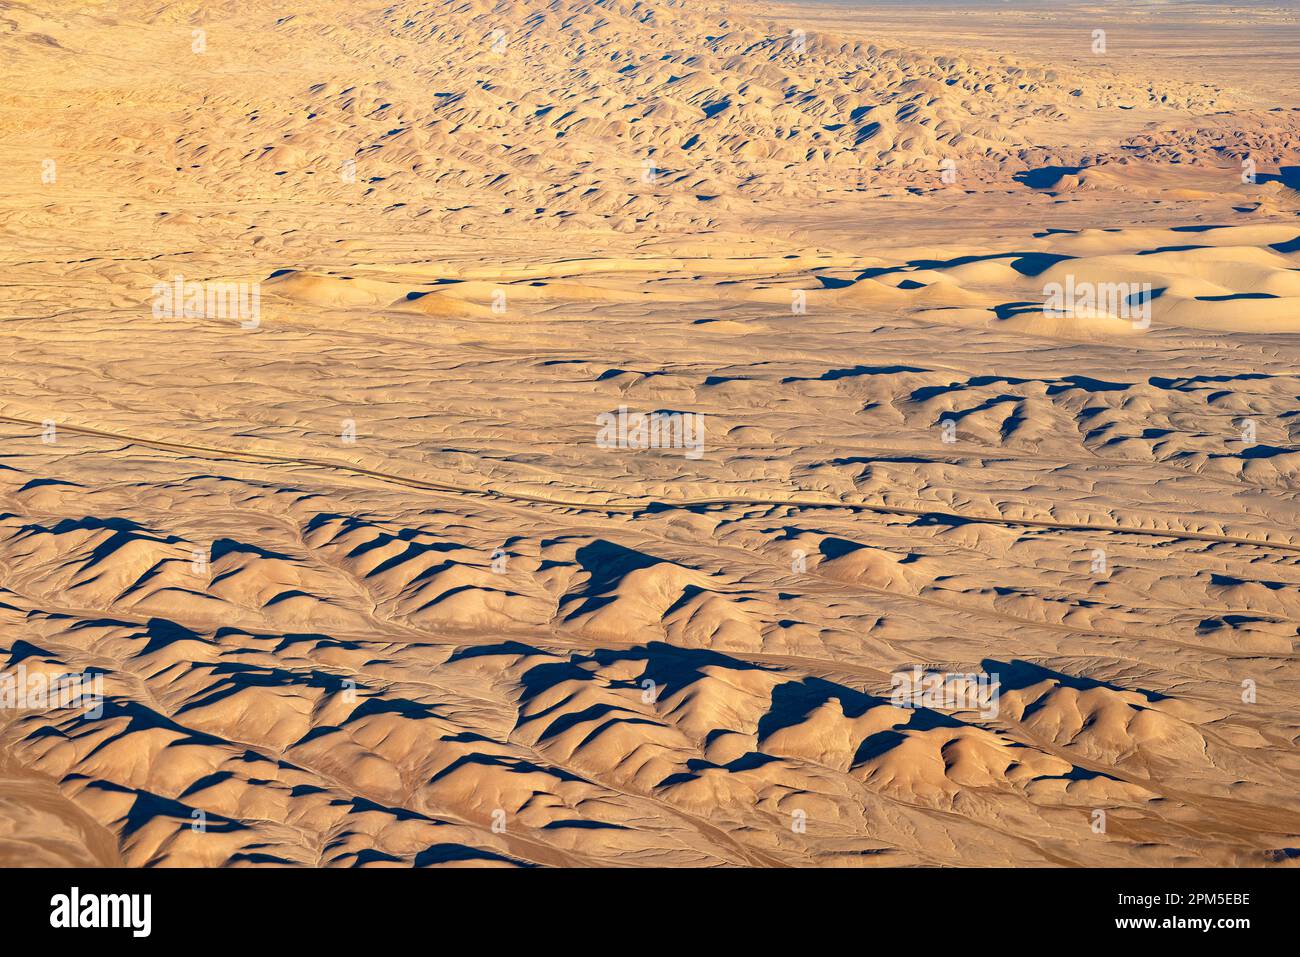 Aerial view of a road crossing the Atacama Desert, Chile Stock Photo